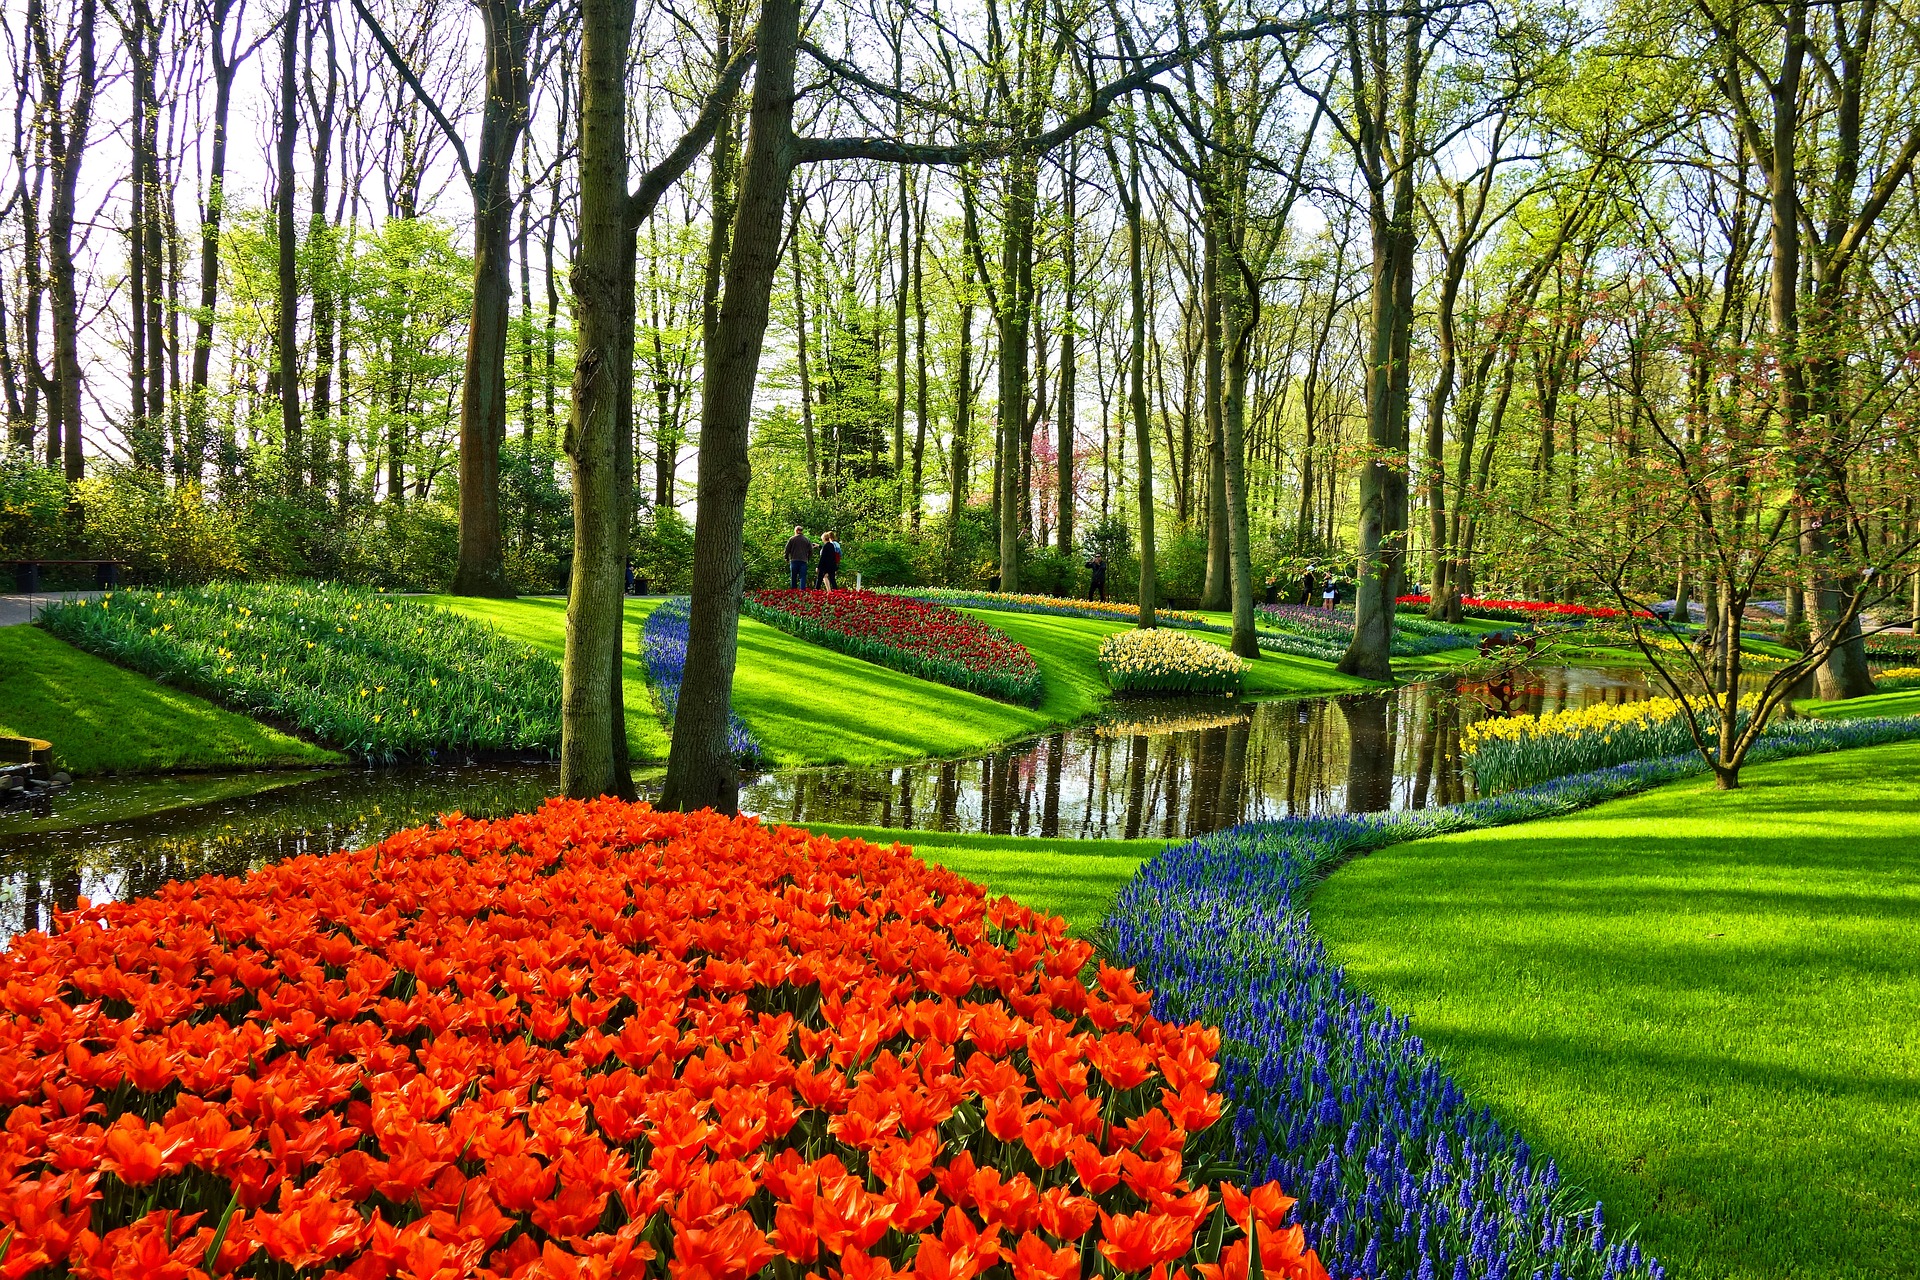 River surrounded by trees and tulips in the Netherlands